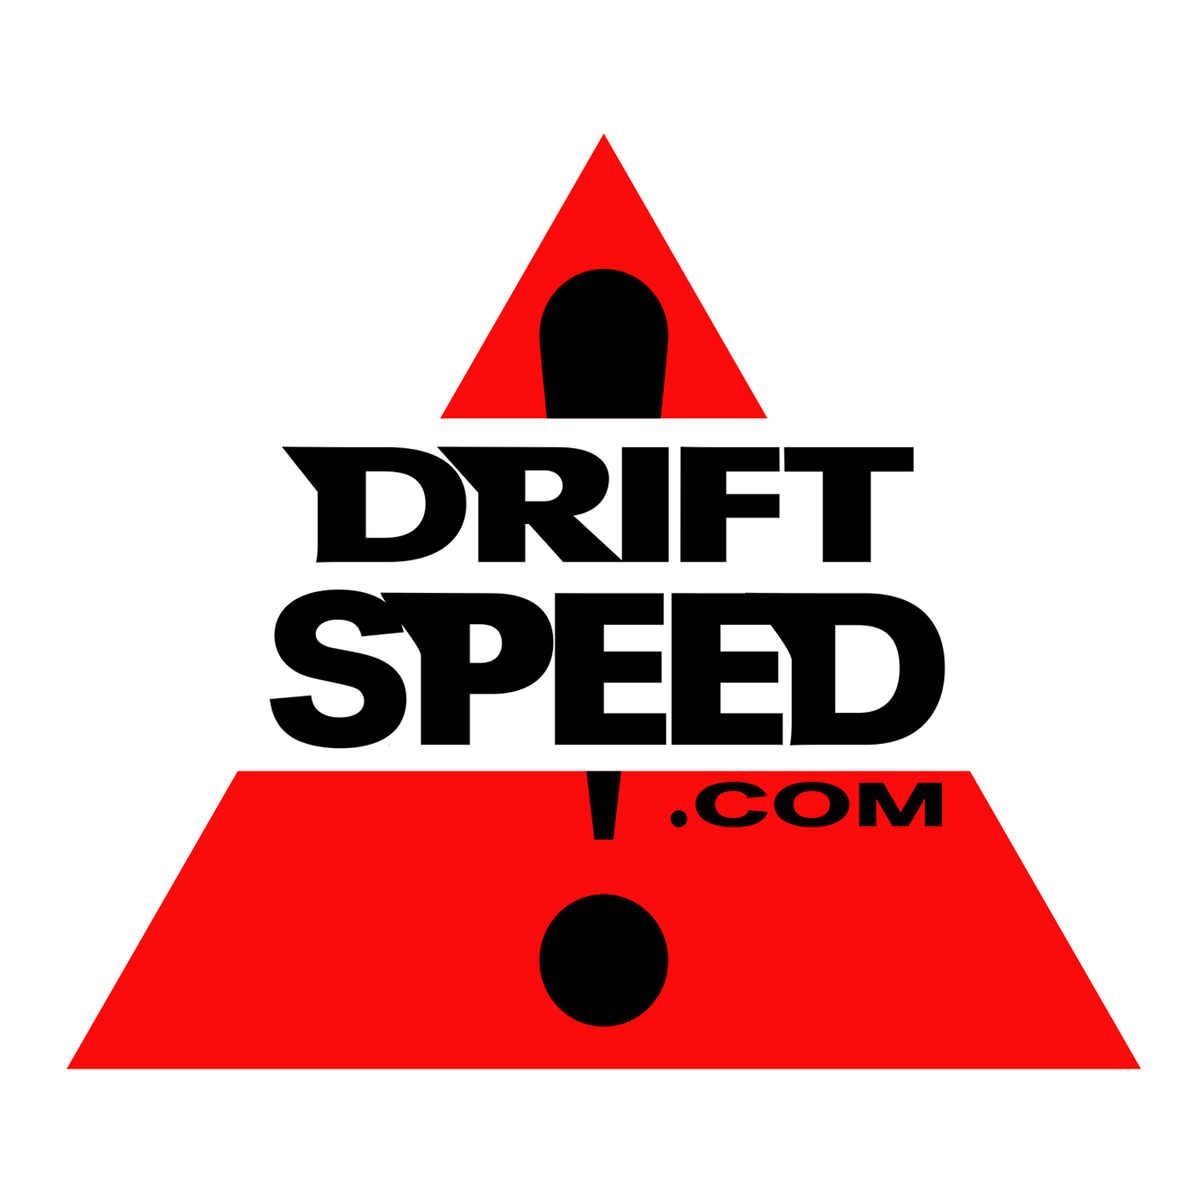 Vintage Official Drift Speed Caution Triangle Sticker Decal - Sugoi JDM